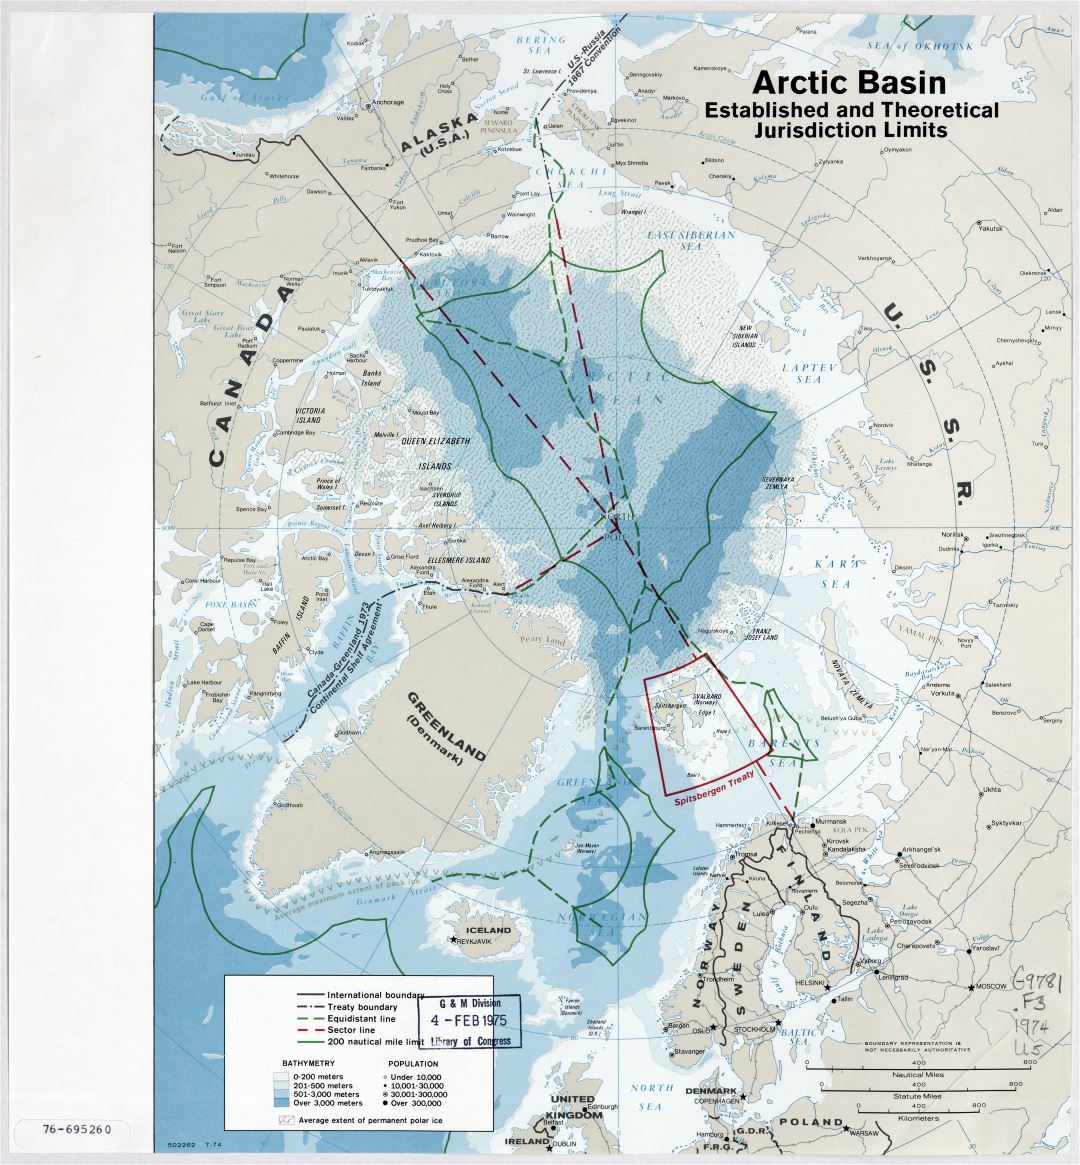 Large scale map of the Arctic Basin, established and theoretical jurisdiction limits - 1974